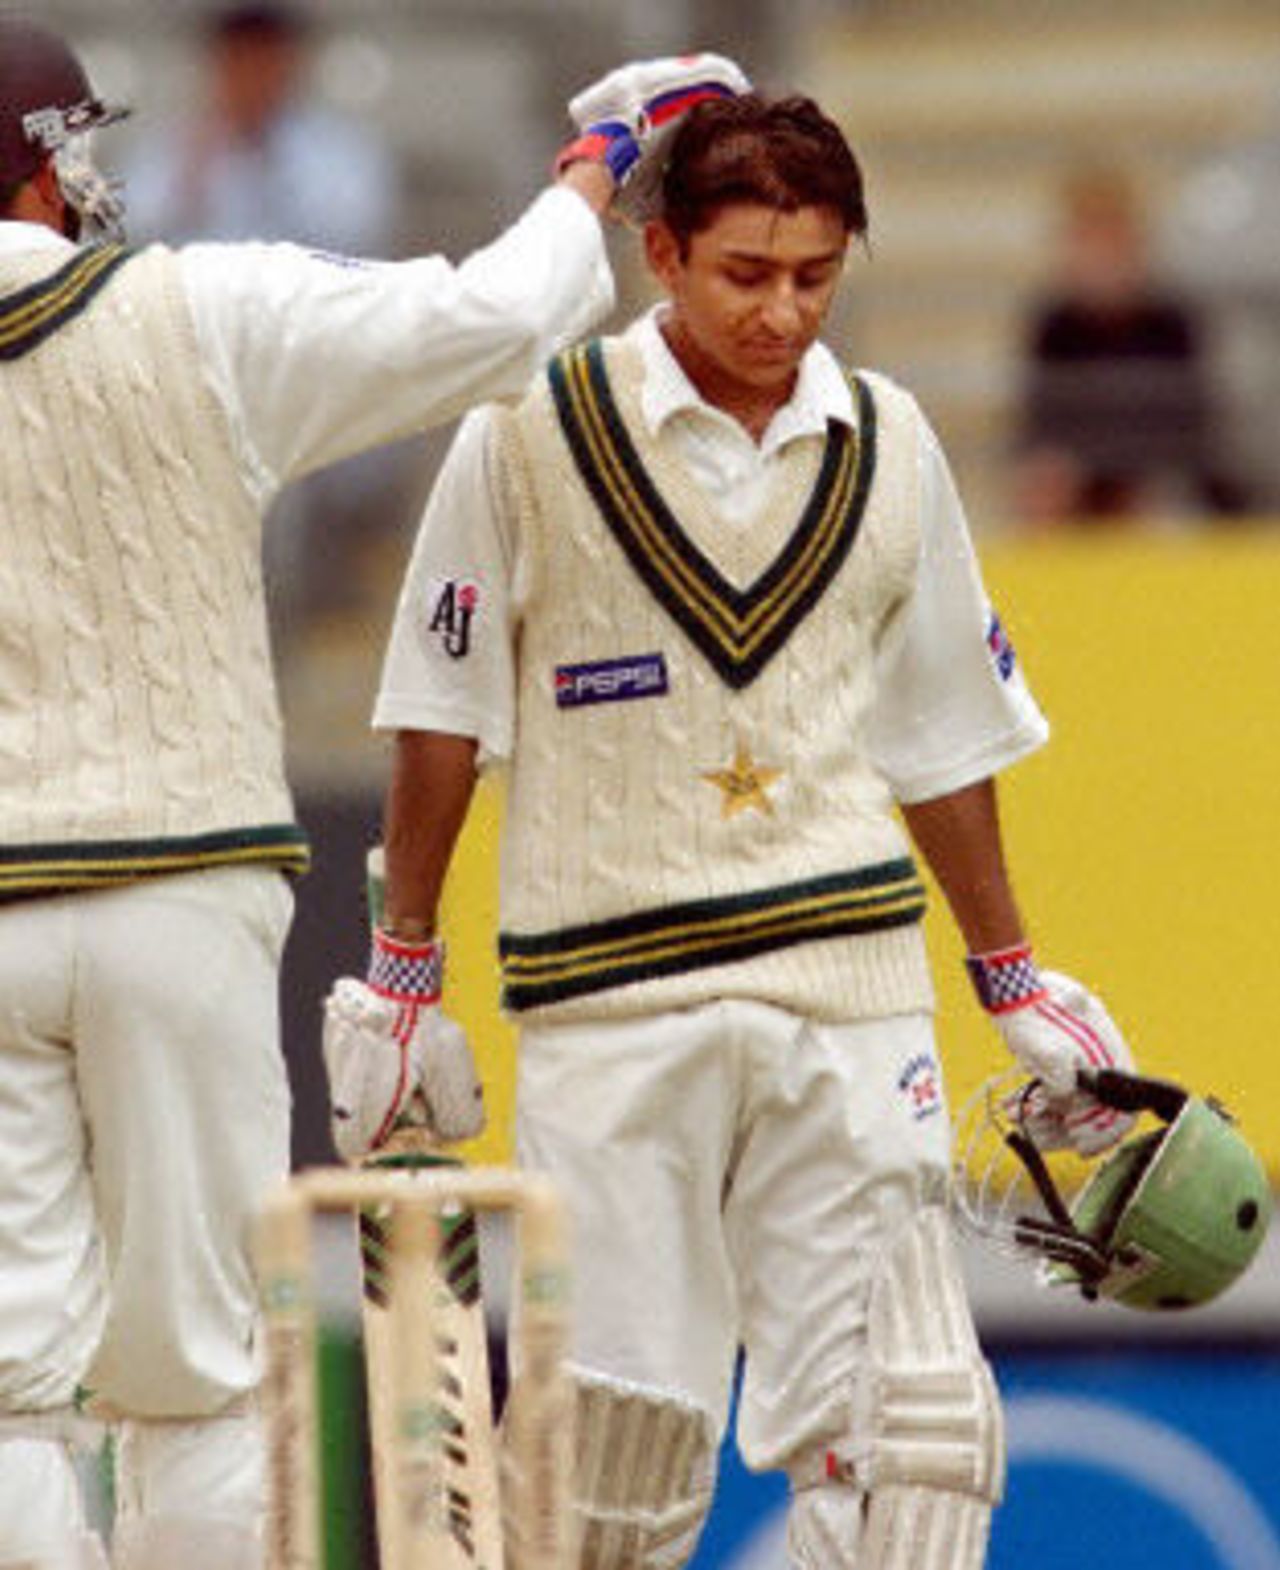 Faisal Iqbal is congratulated by Younis Khan after scoring his first test half century, day 4, 1st Test at Eden Park in Auckland, 8-12 March 2001.